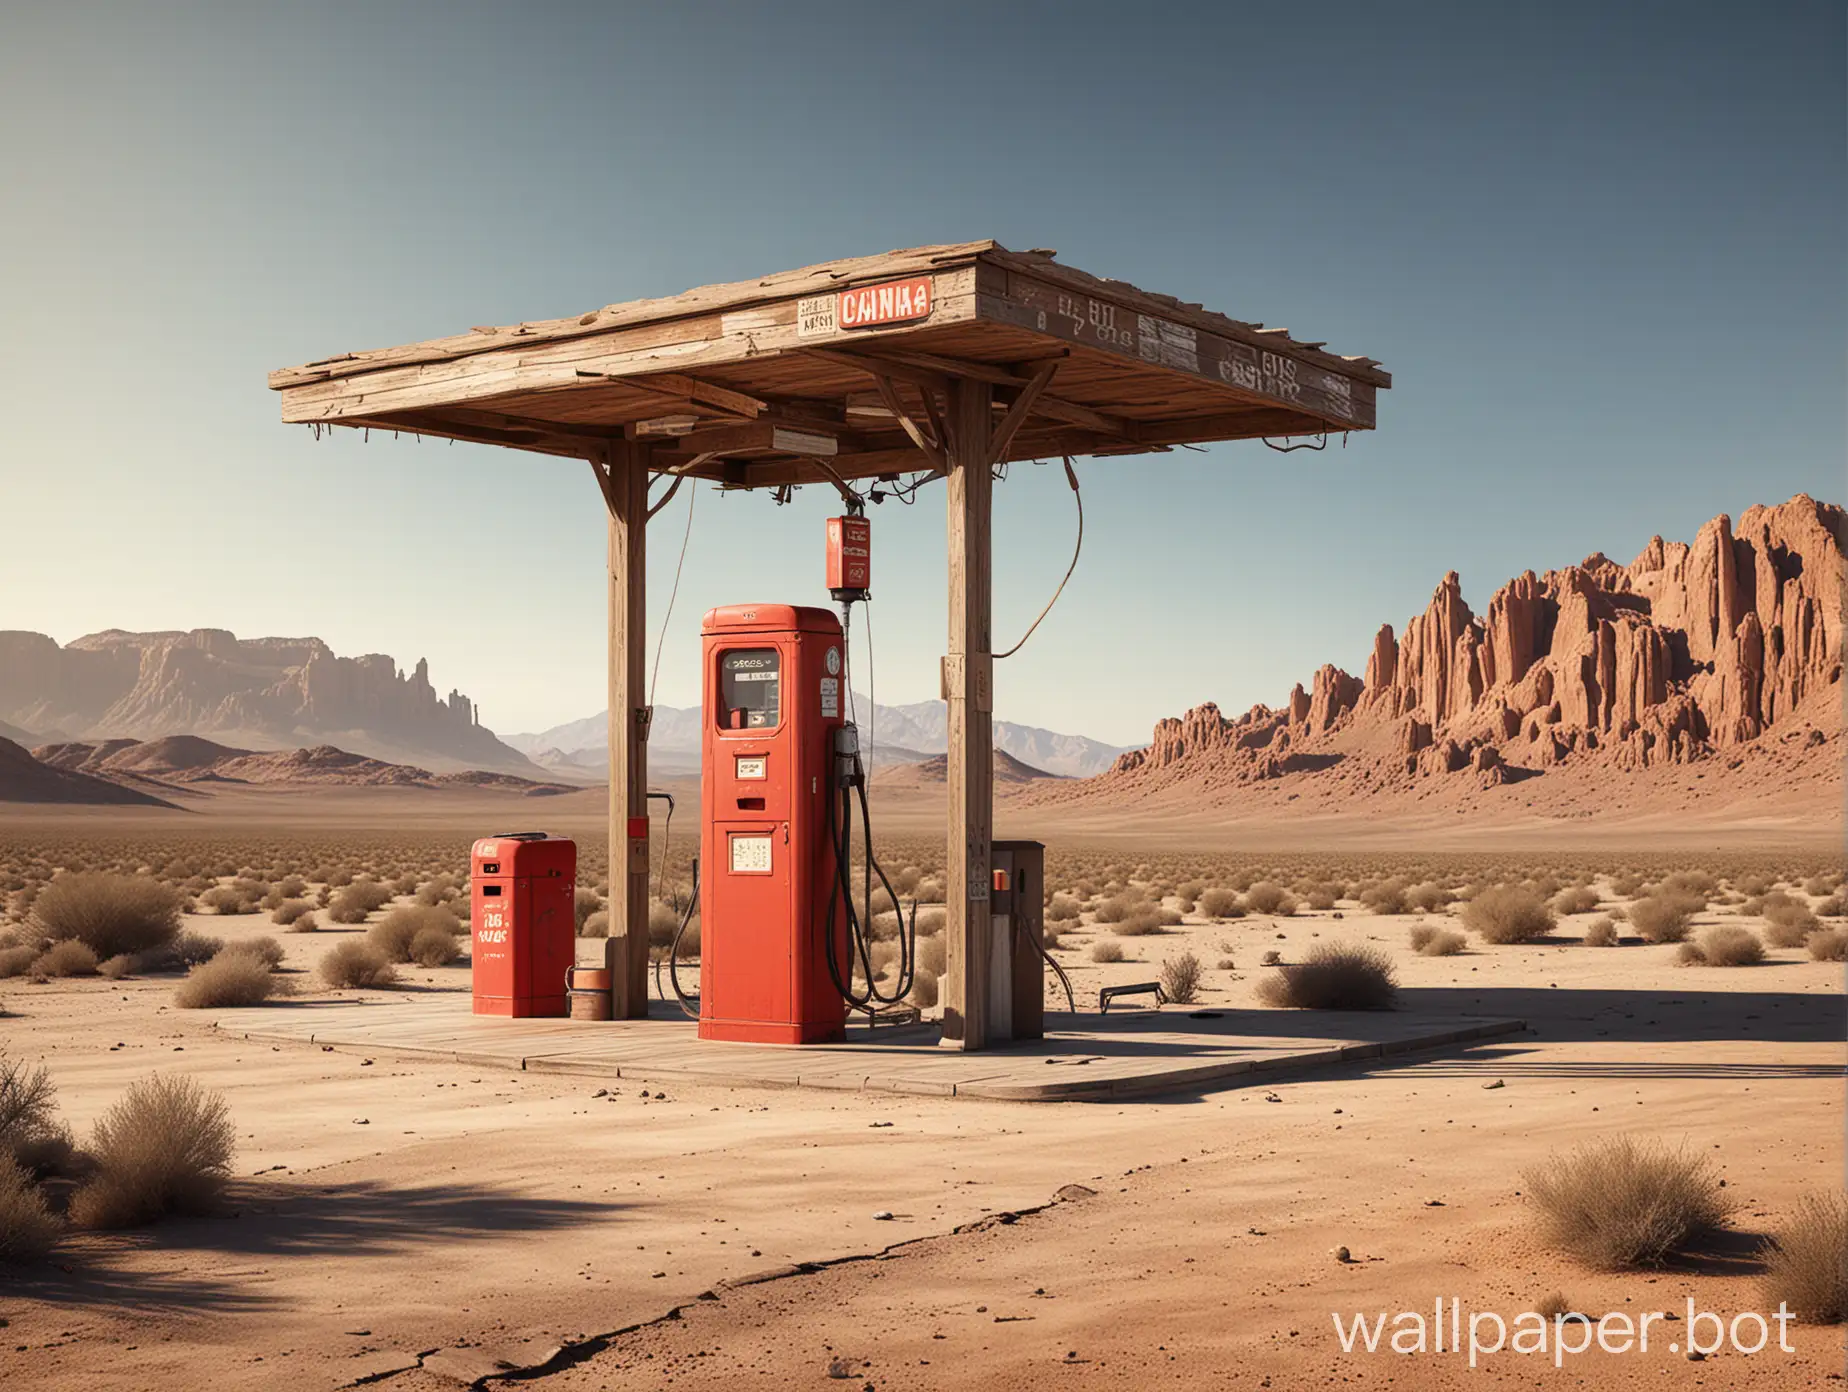 A captivating, high-resolution 3D render of an old wooden gas station in a barren desert landscape. The gas station features a red gas pump and a rustic, weathered exterior. The photograph has a vibrant, cinematic quality, highlighting the architectural details and the dramatic contrast between the building and the desert environment. The overall atmosphere is both nostalgic and mysterious., illustration, vibrant, 3d render, architecture, cinematic, photo